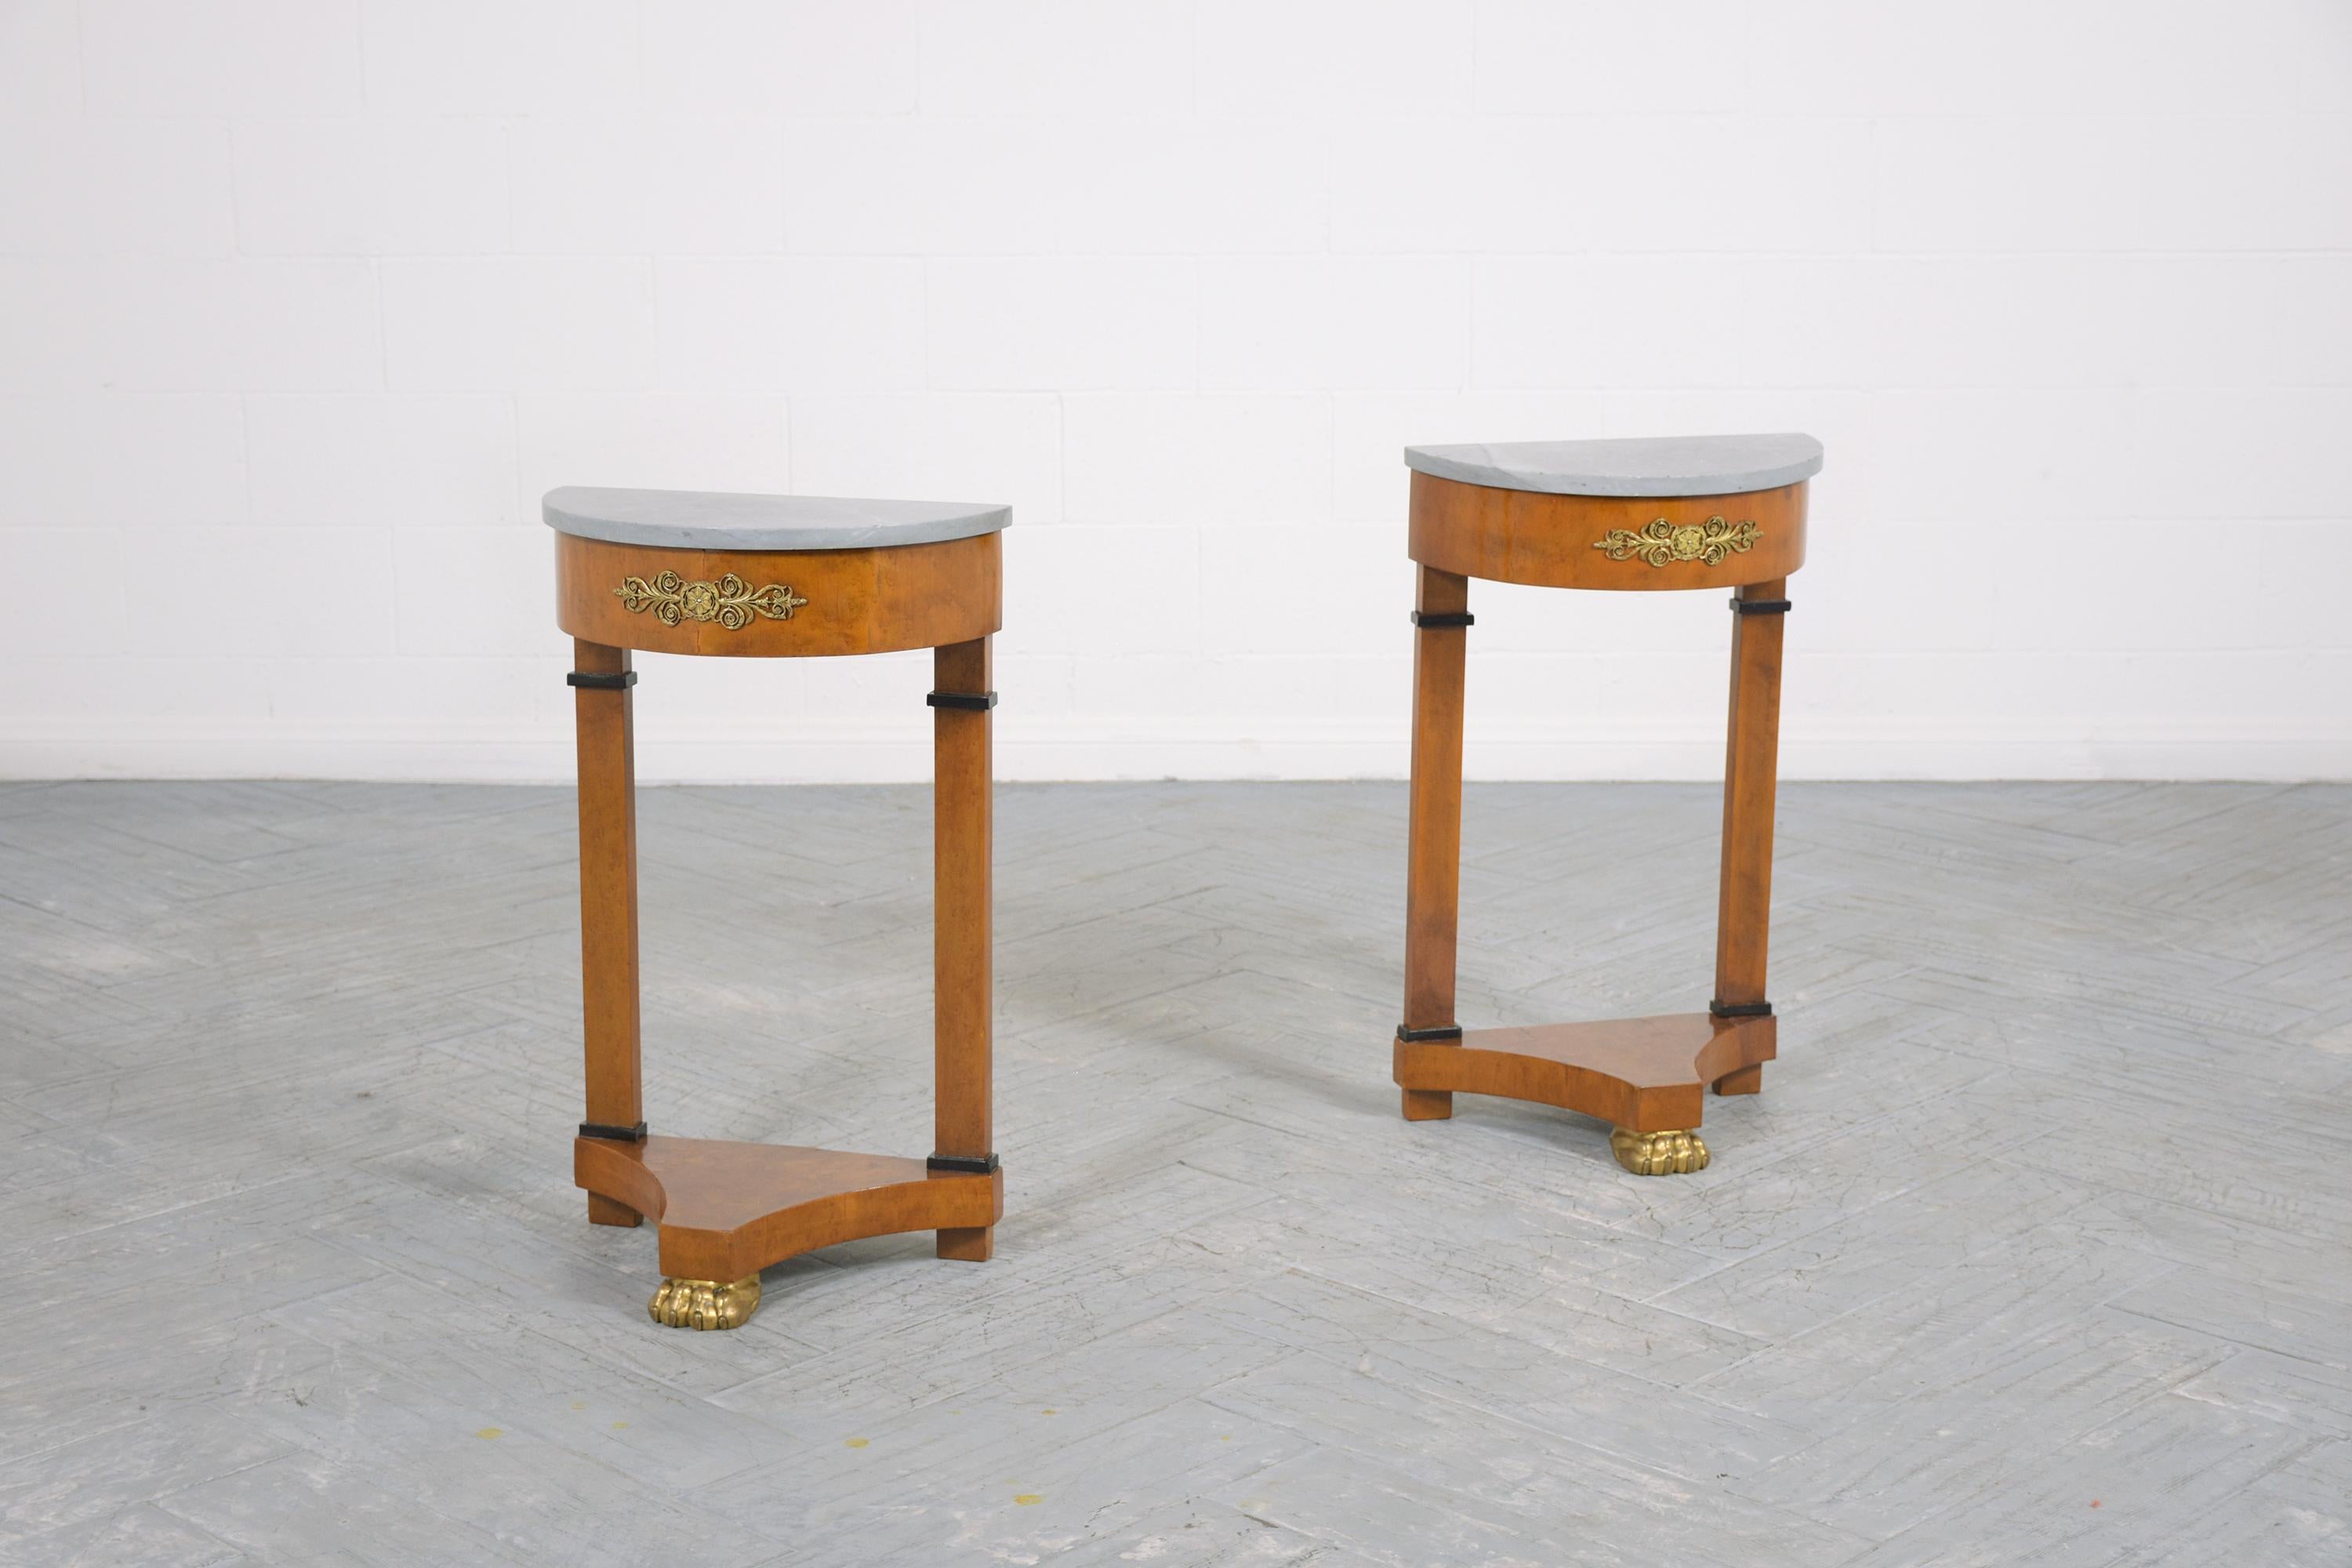 An extraordinary pair of antique demilune Empire side tables are in good condition beautifully crafted out of solid wood covered with a bird’s-eye veneer professionally restored by our professional craftsmen team. This lovely set features its